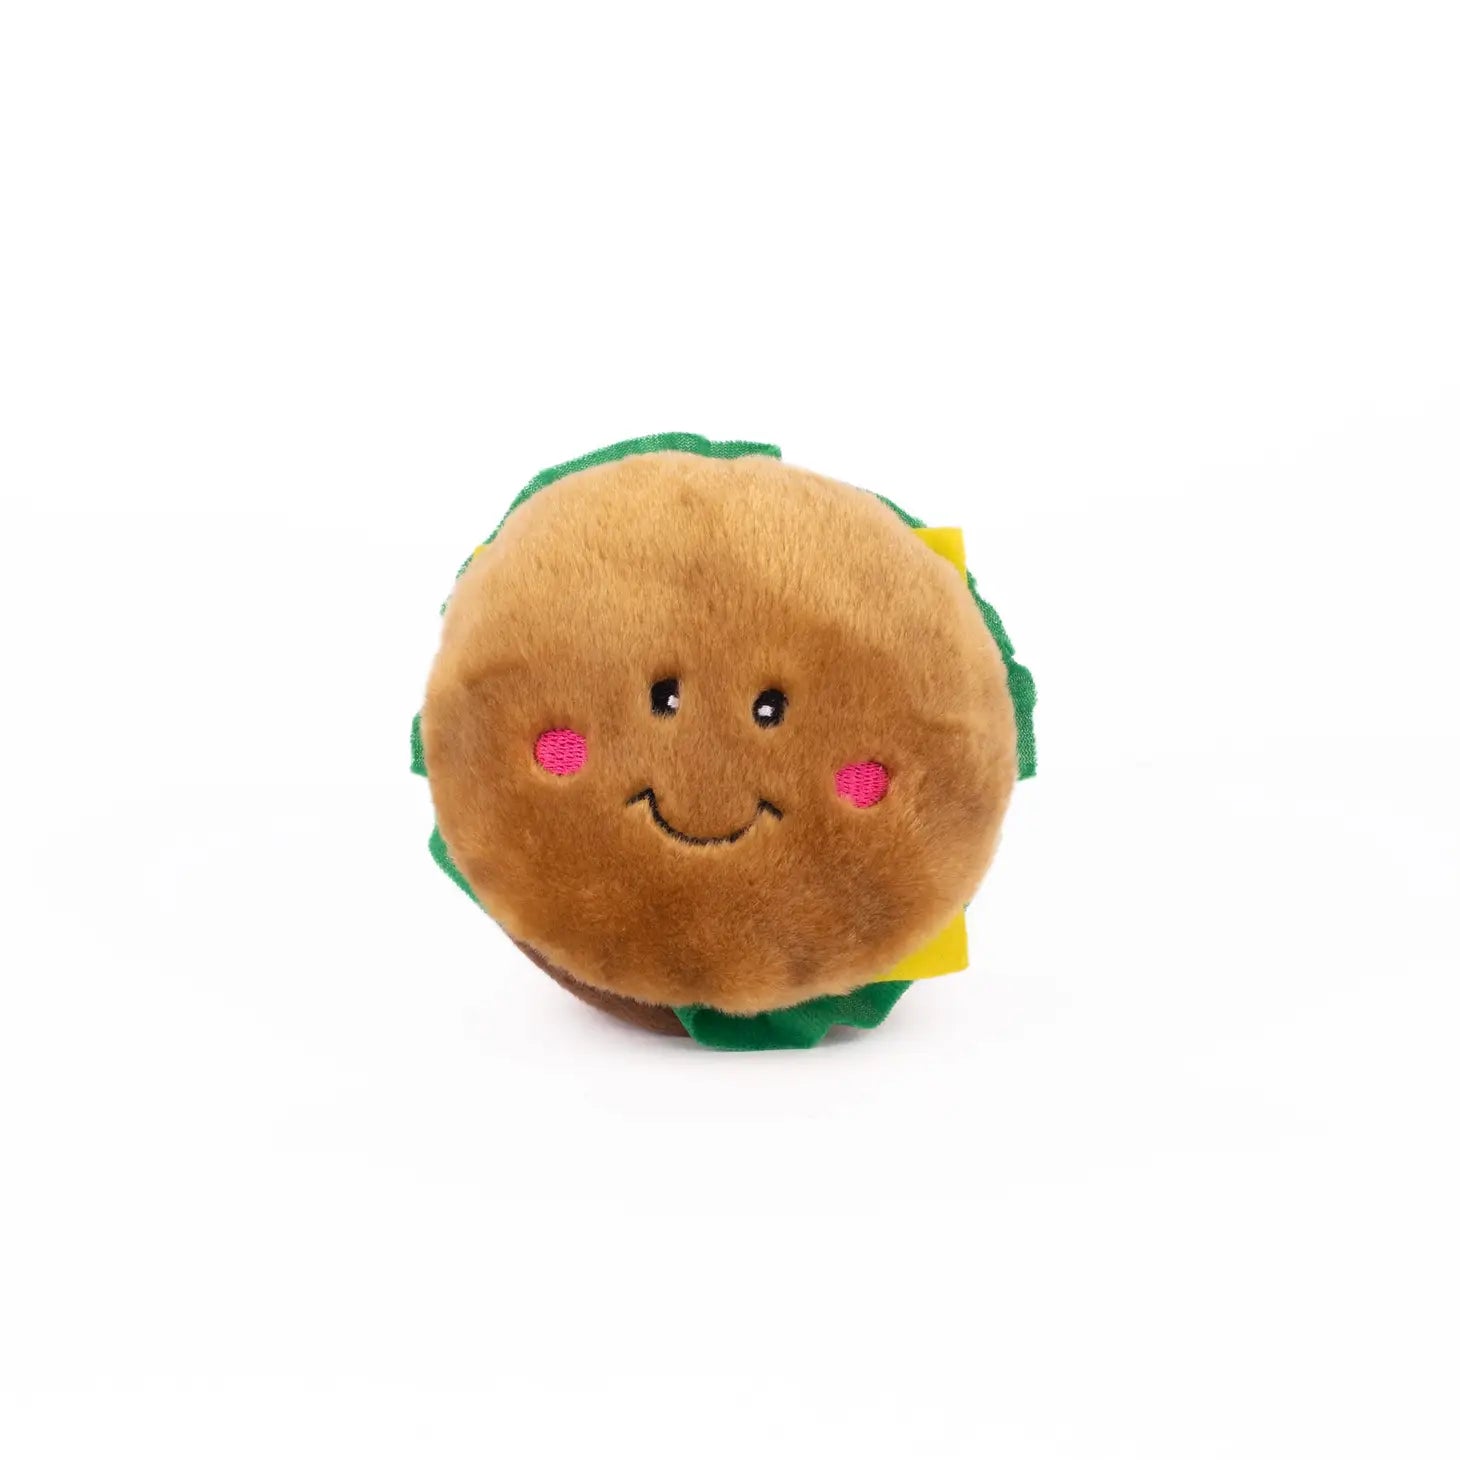 Top view of a plushy cheeseburger dog toy showing a big smile